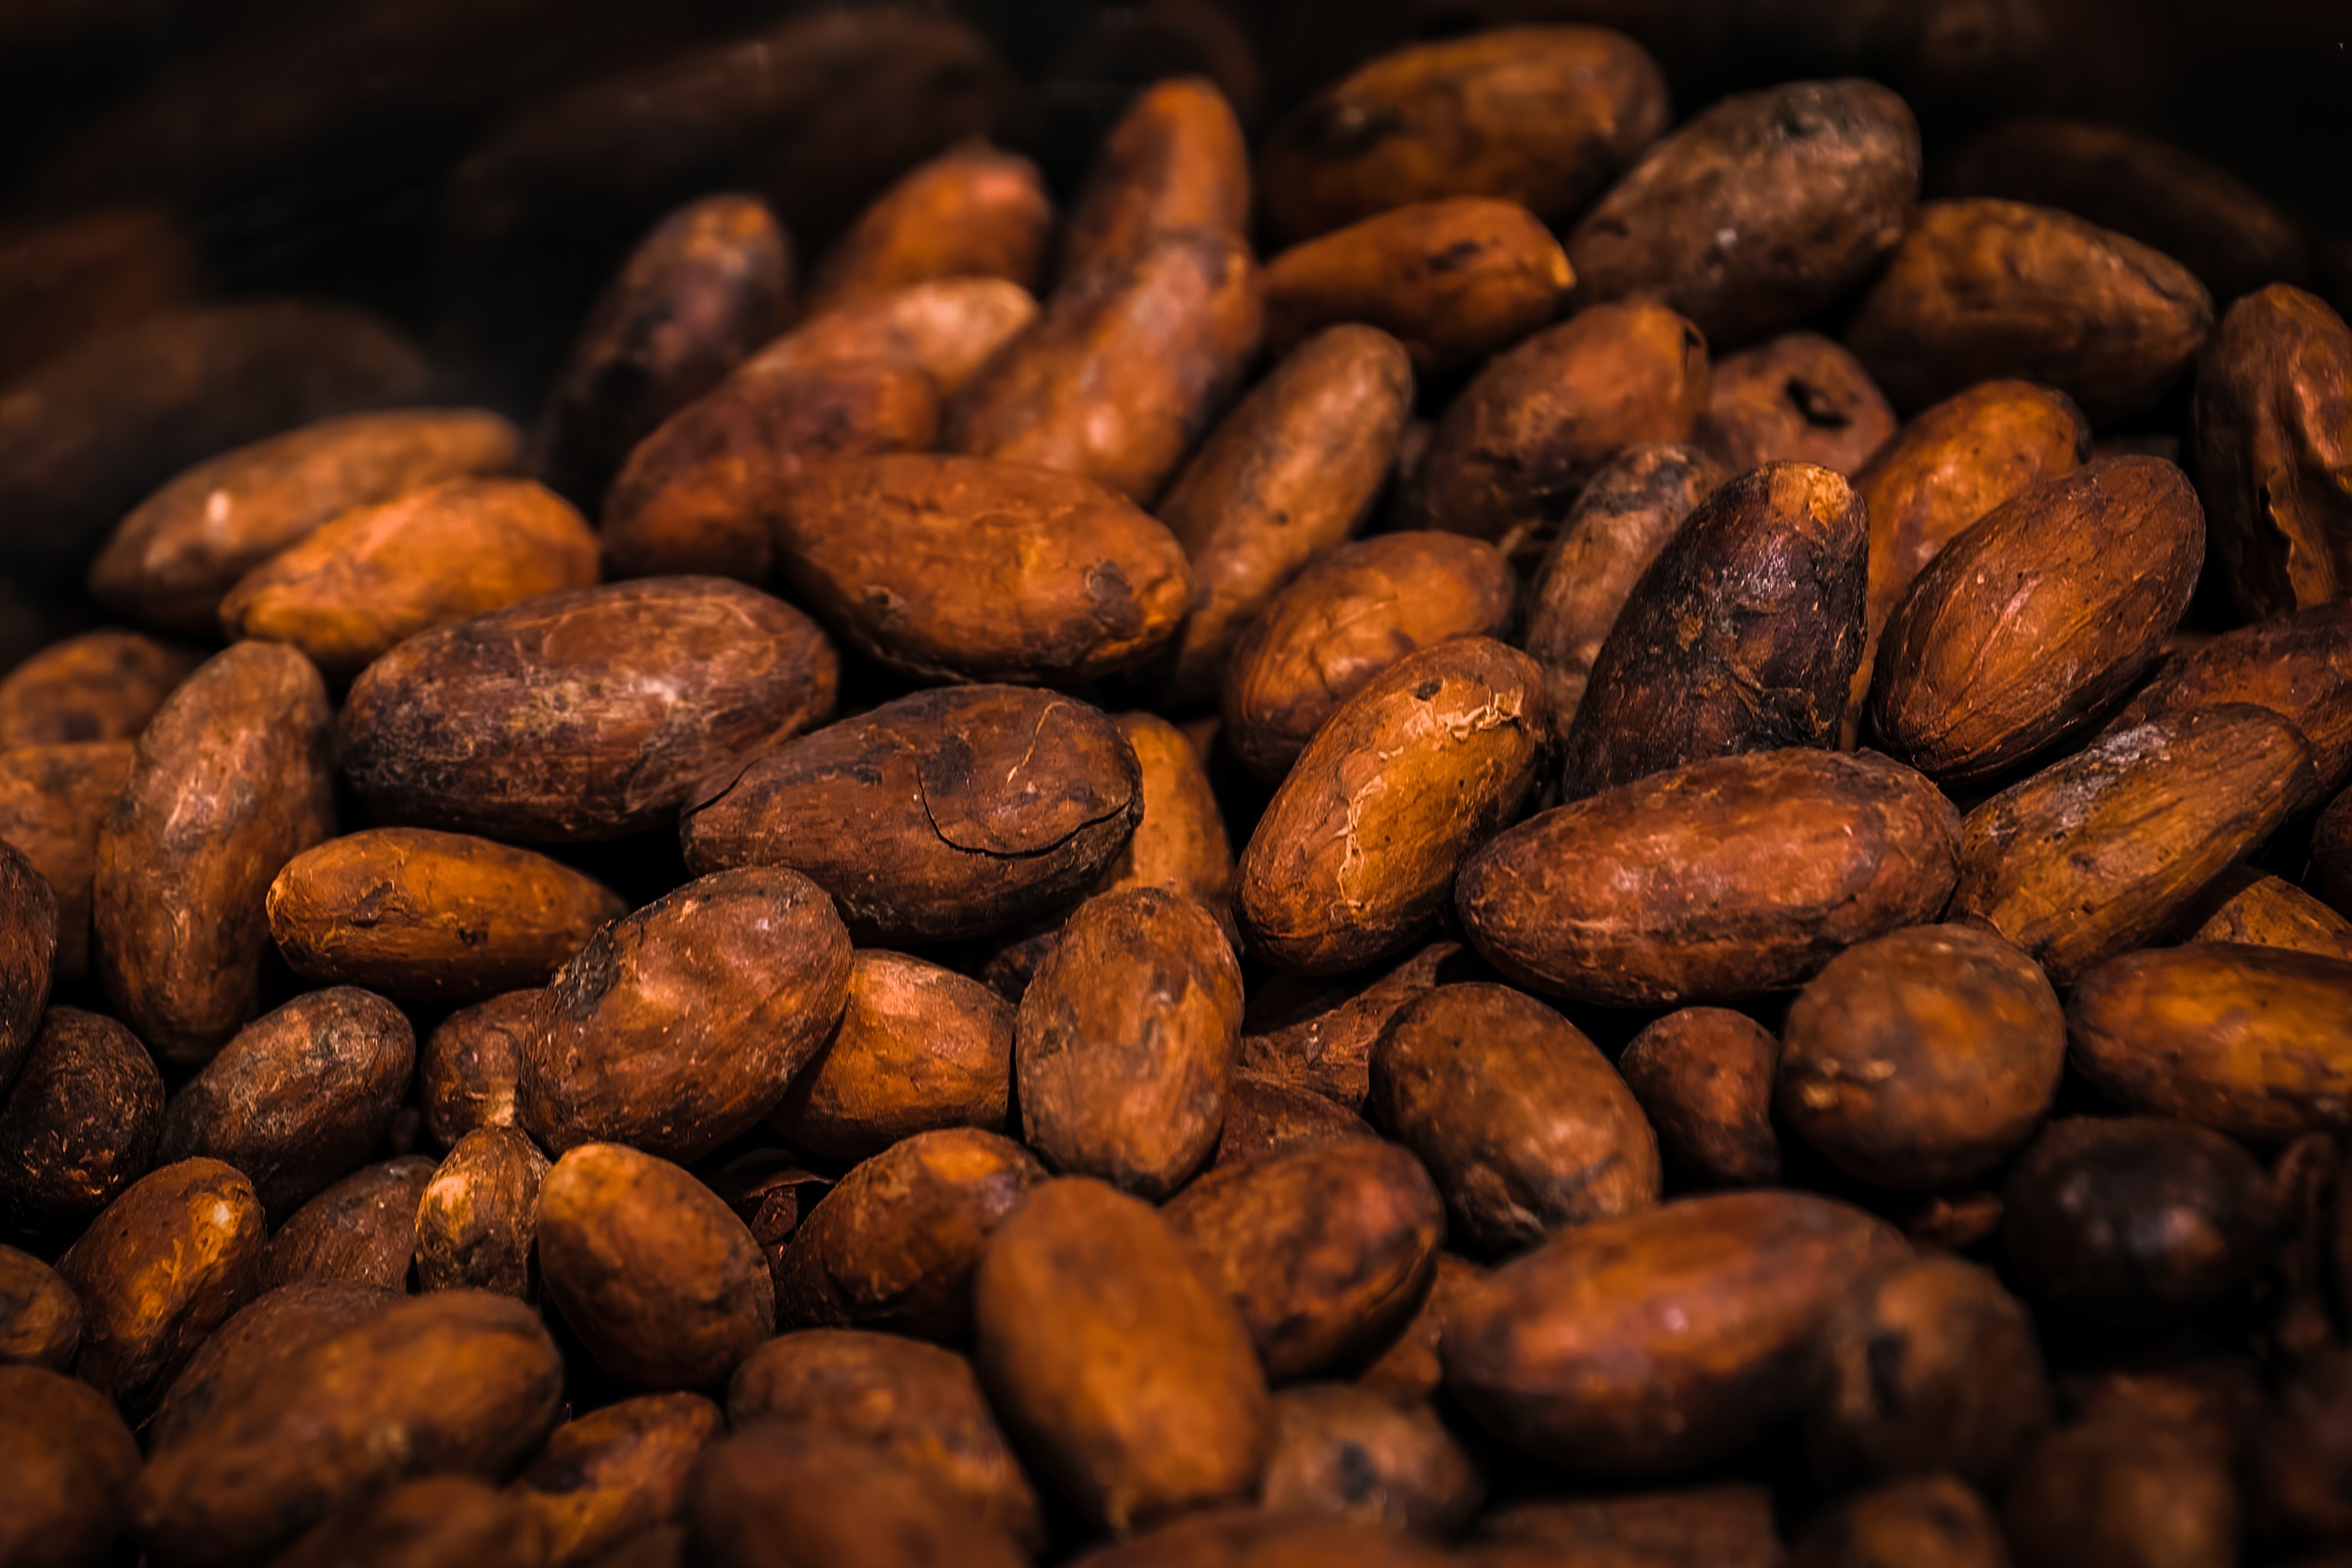 Up close photo of roasted cacao beans